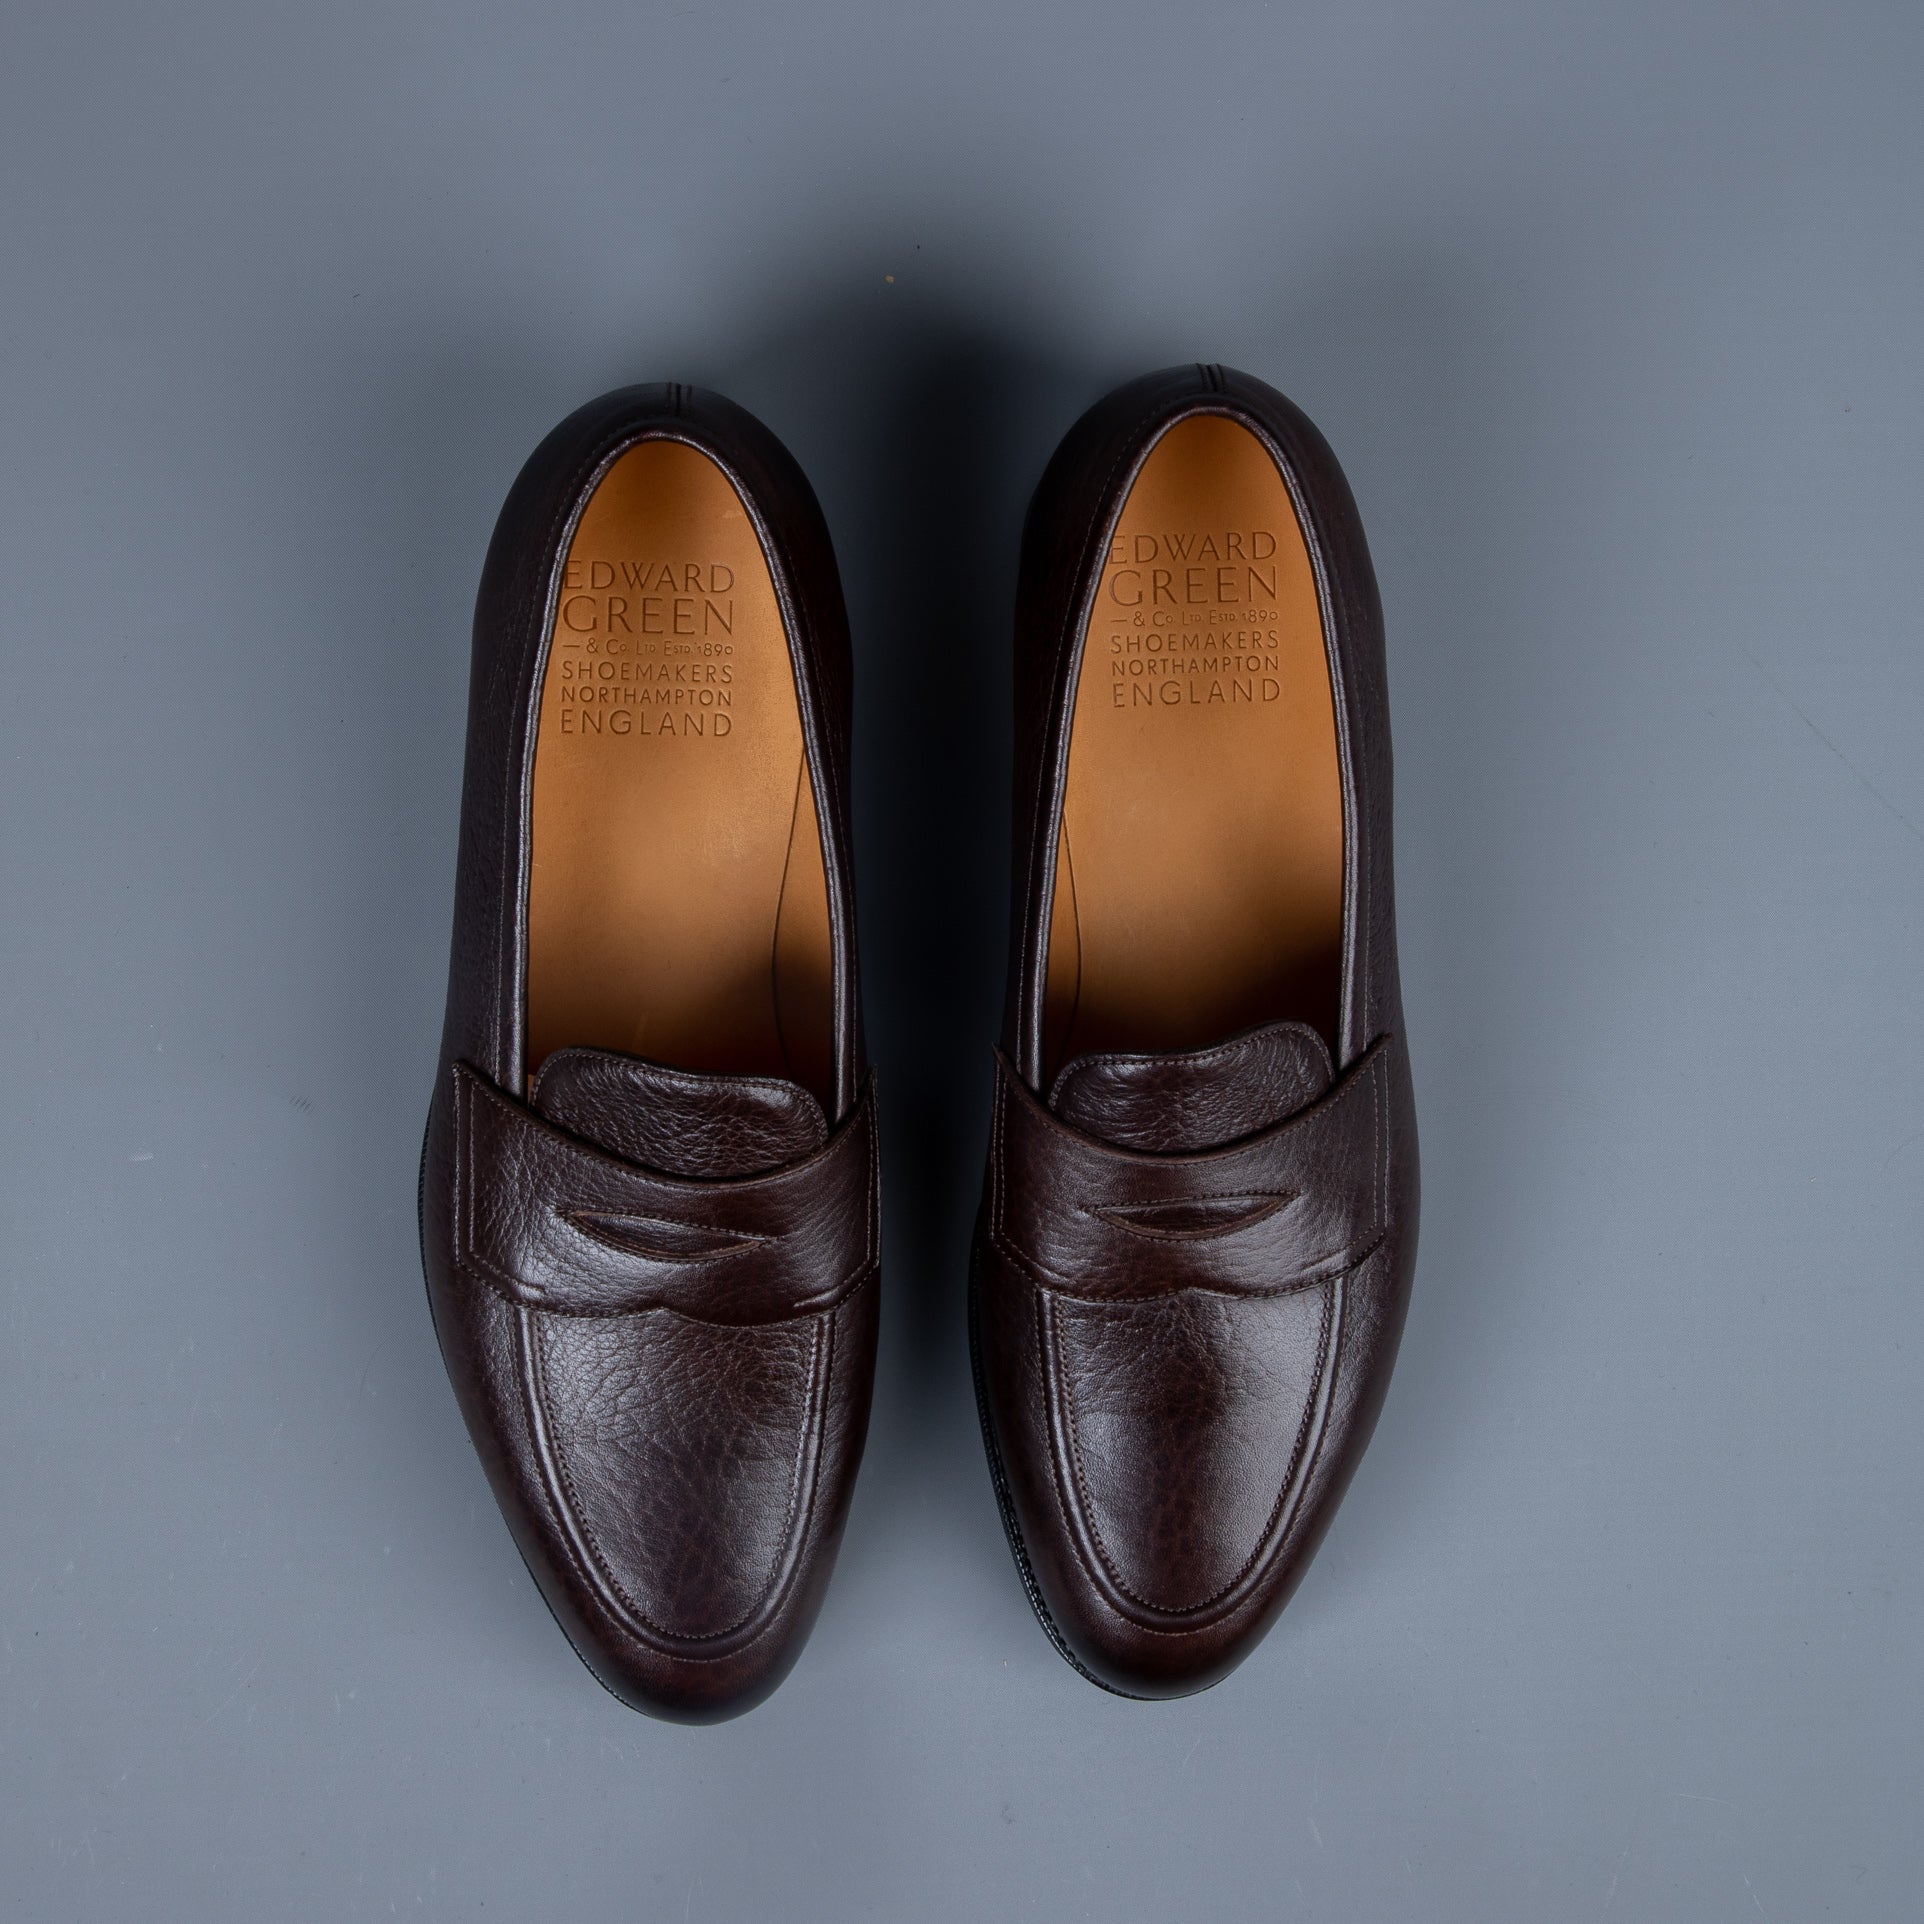 Loafers top view